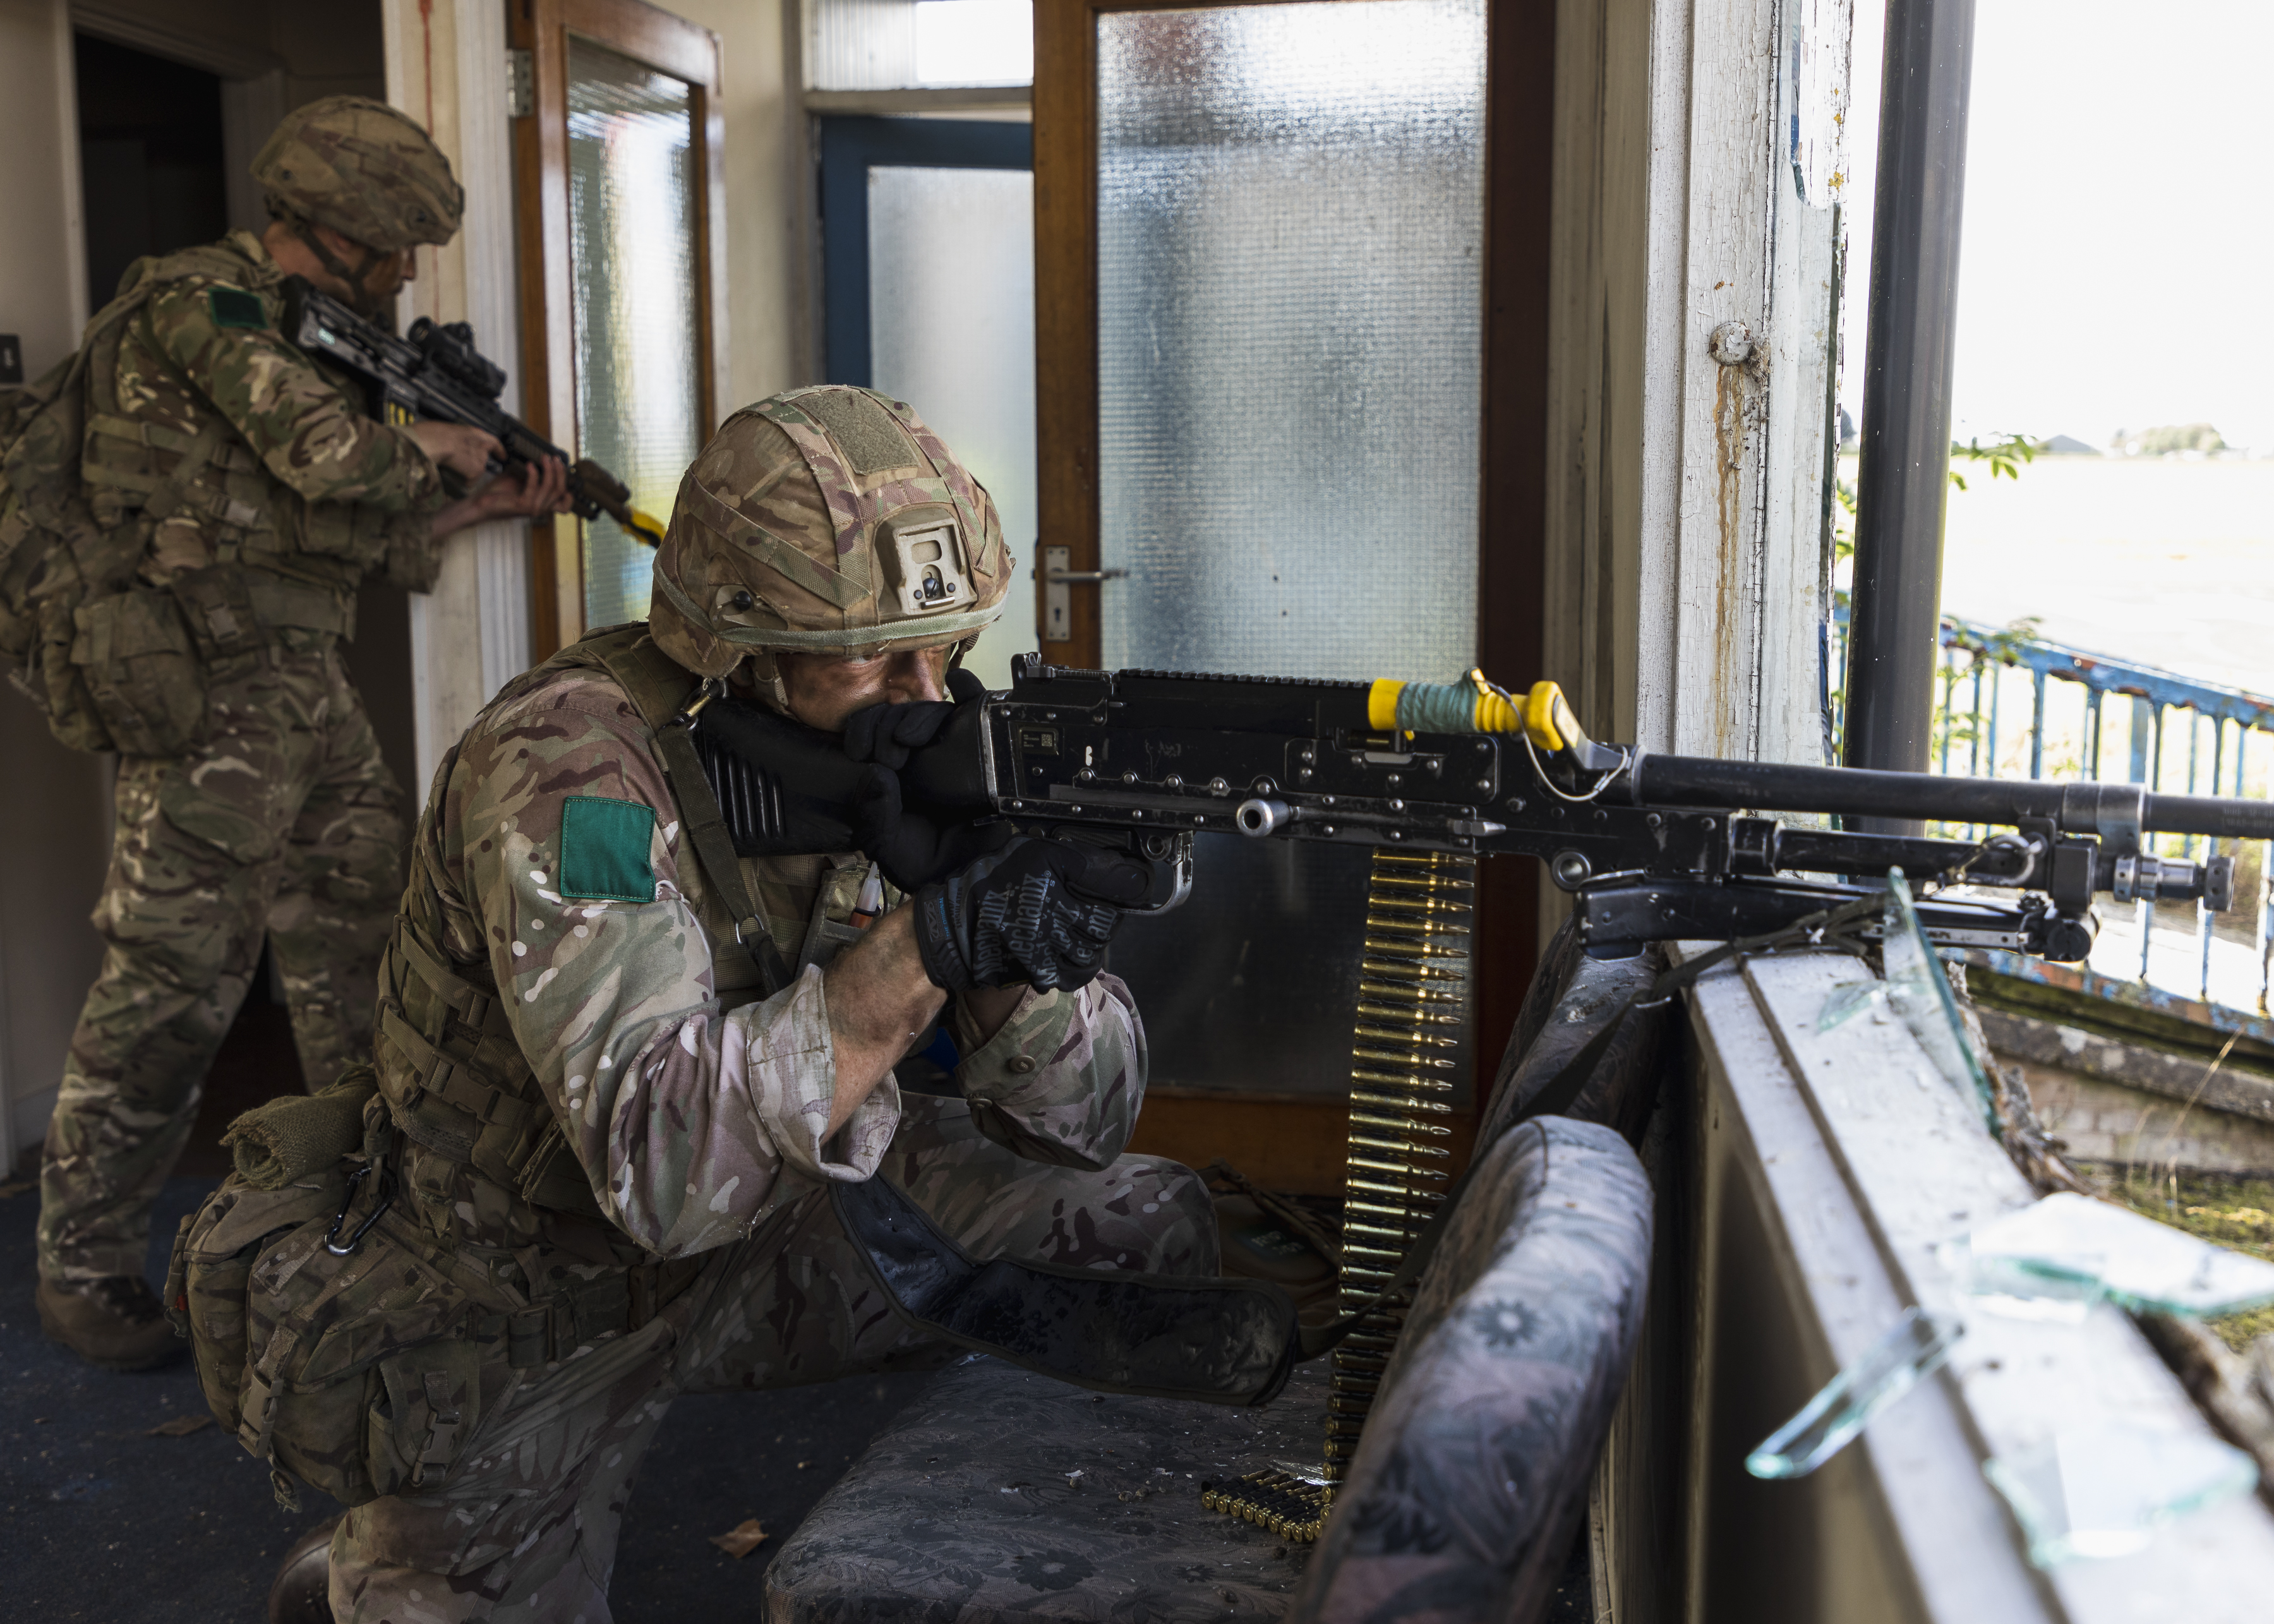 Image shows RAF personnel looking out of building with heavy machine gun and rifles..